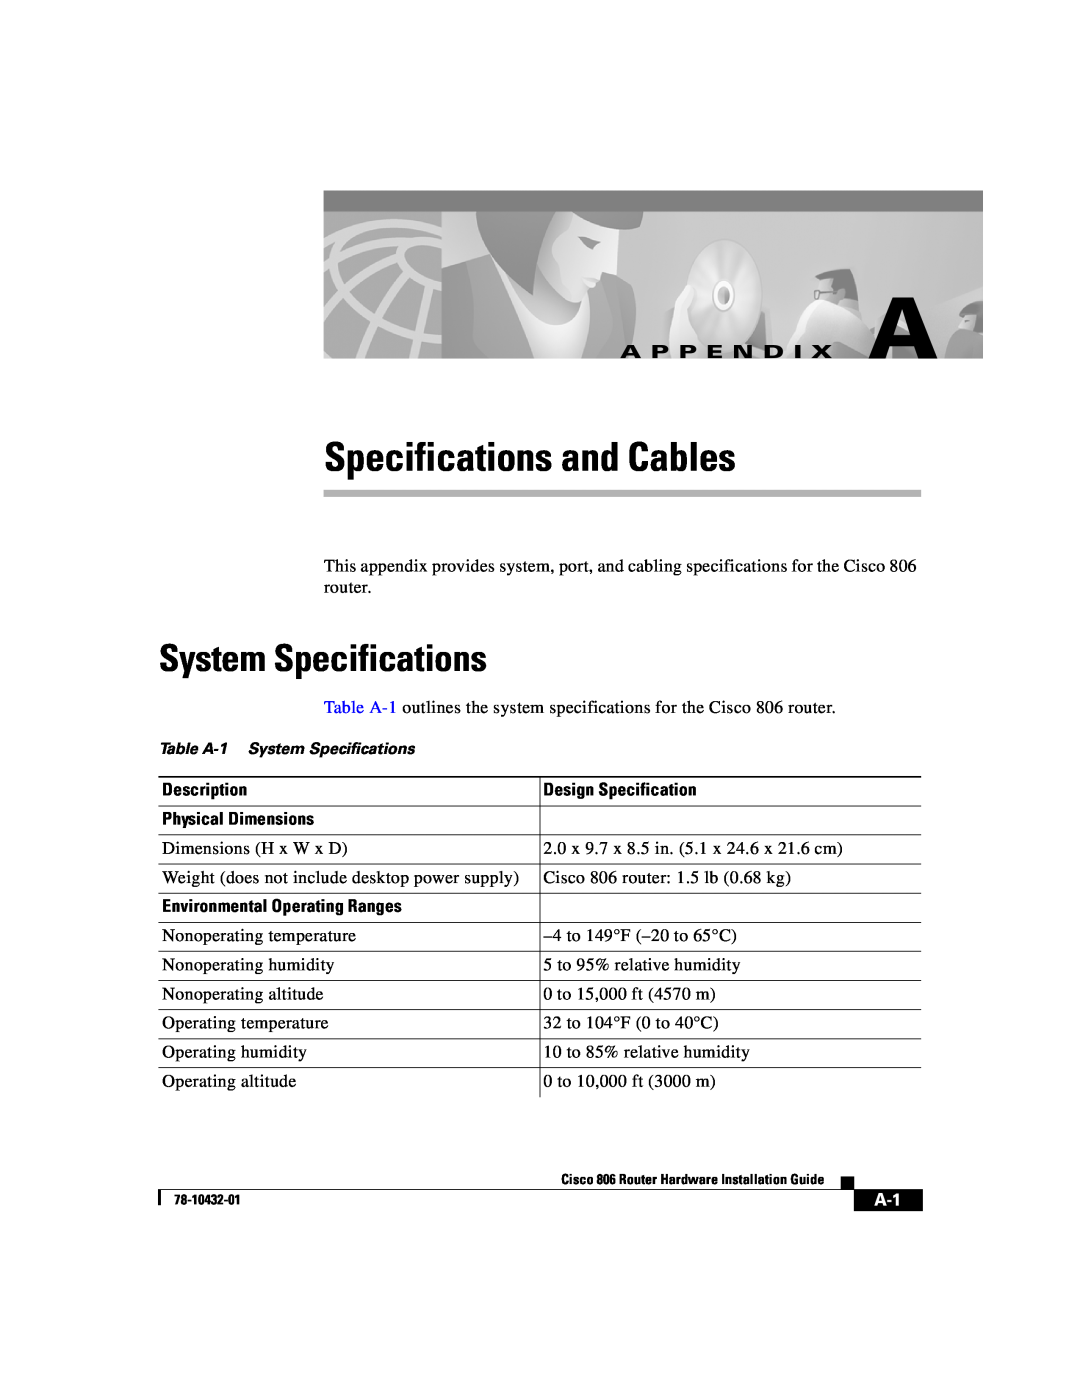 Cisco Systems 806 manual Specifications and Cables, System Specifications, A P P E N D I X A 